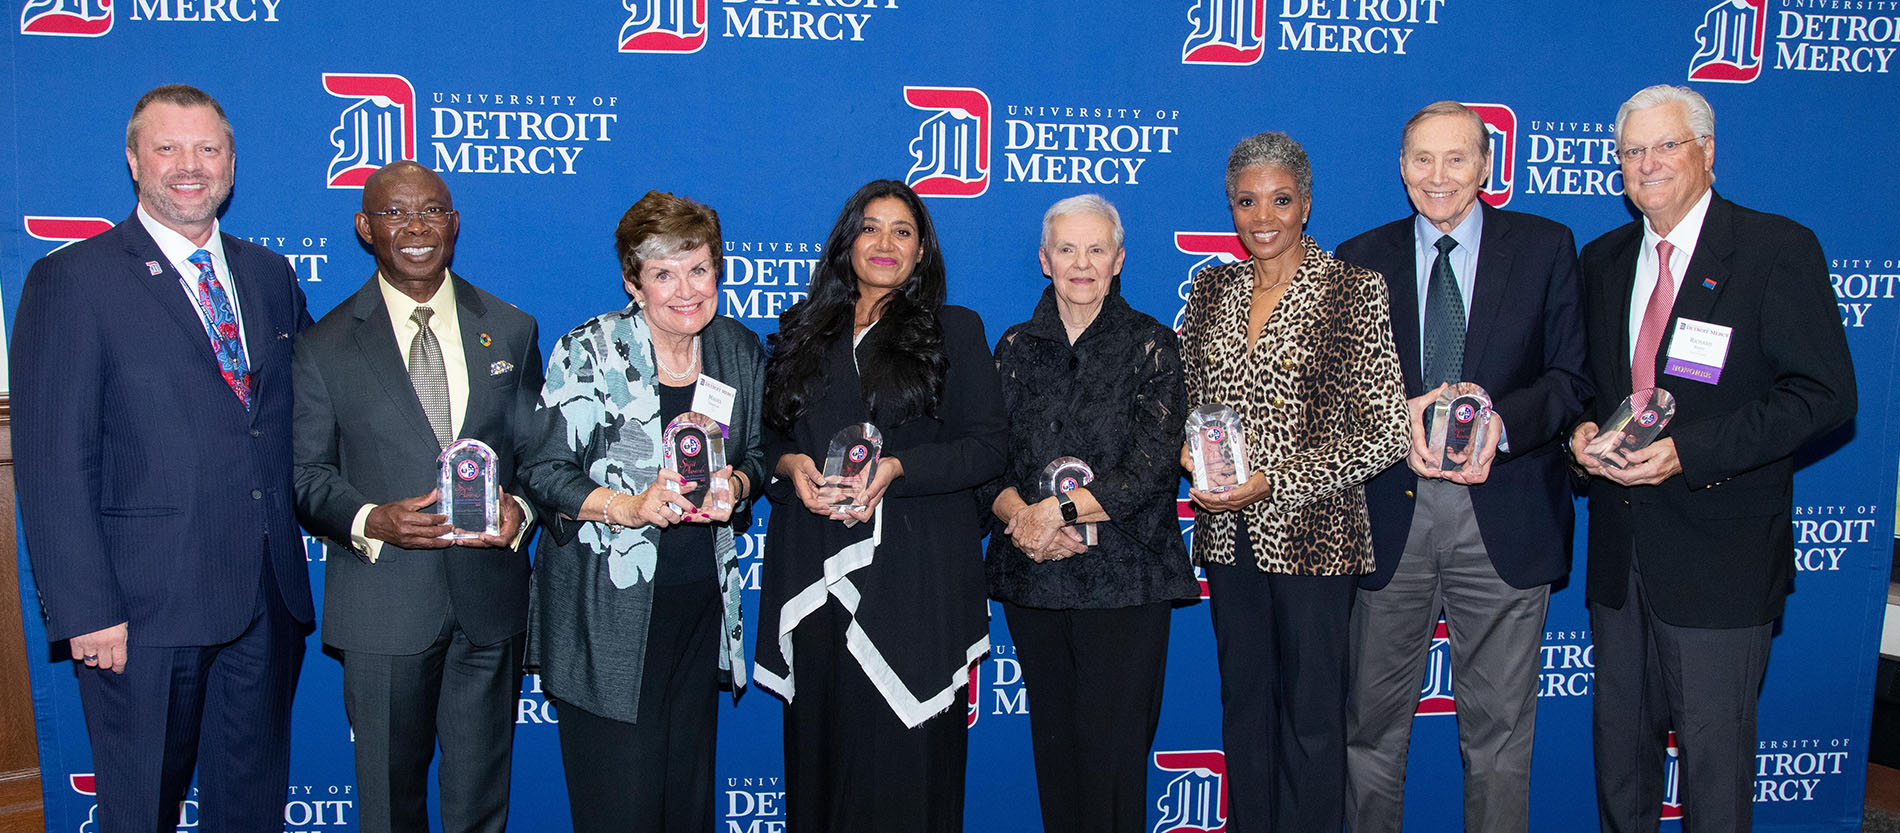 President Taylor poses with the seven Spirit Award winners in front of a blue University of Detroit Mercy banner.